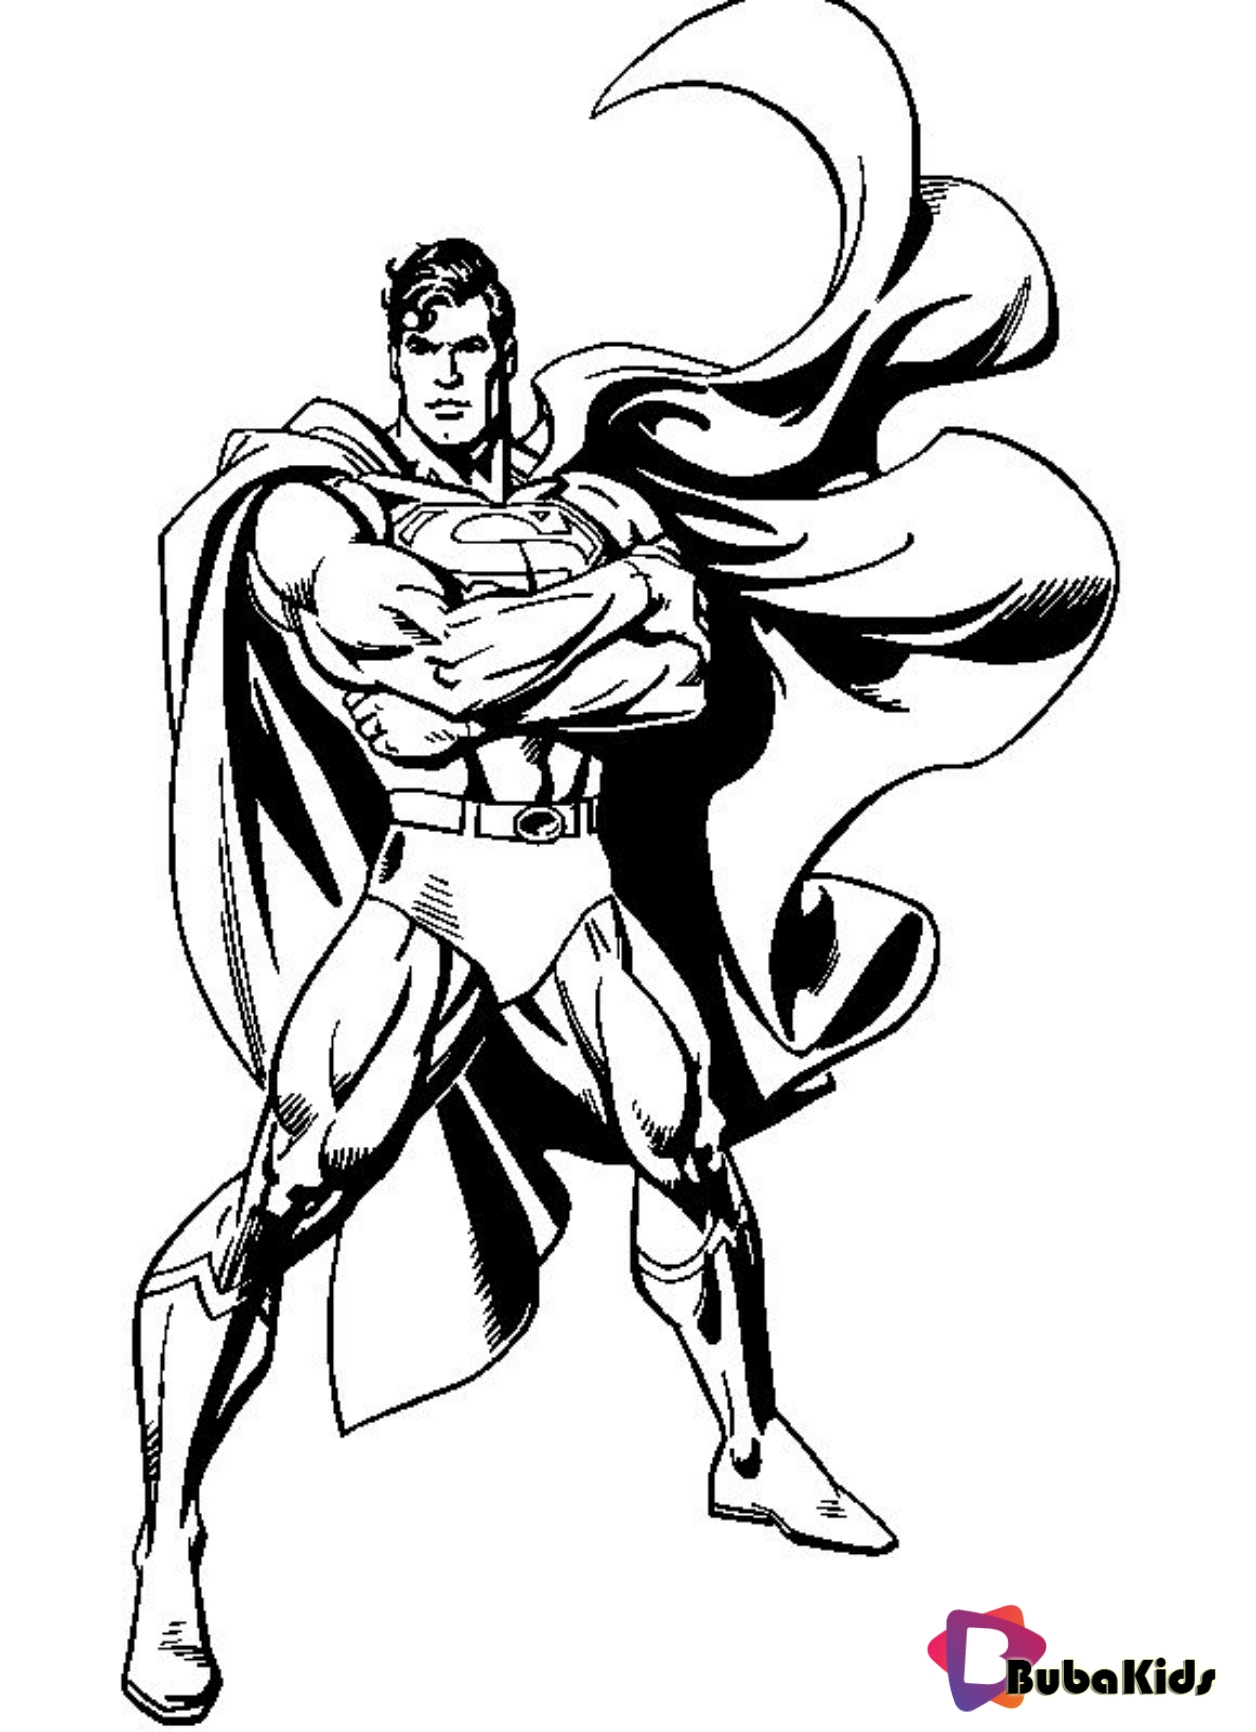 Superman coloring page, cartoon characters coloring pages on bubakids.com